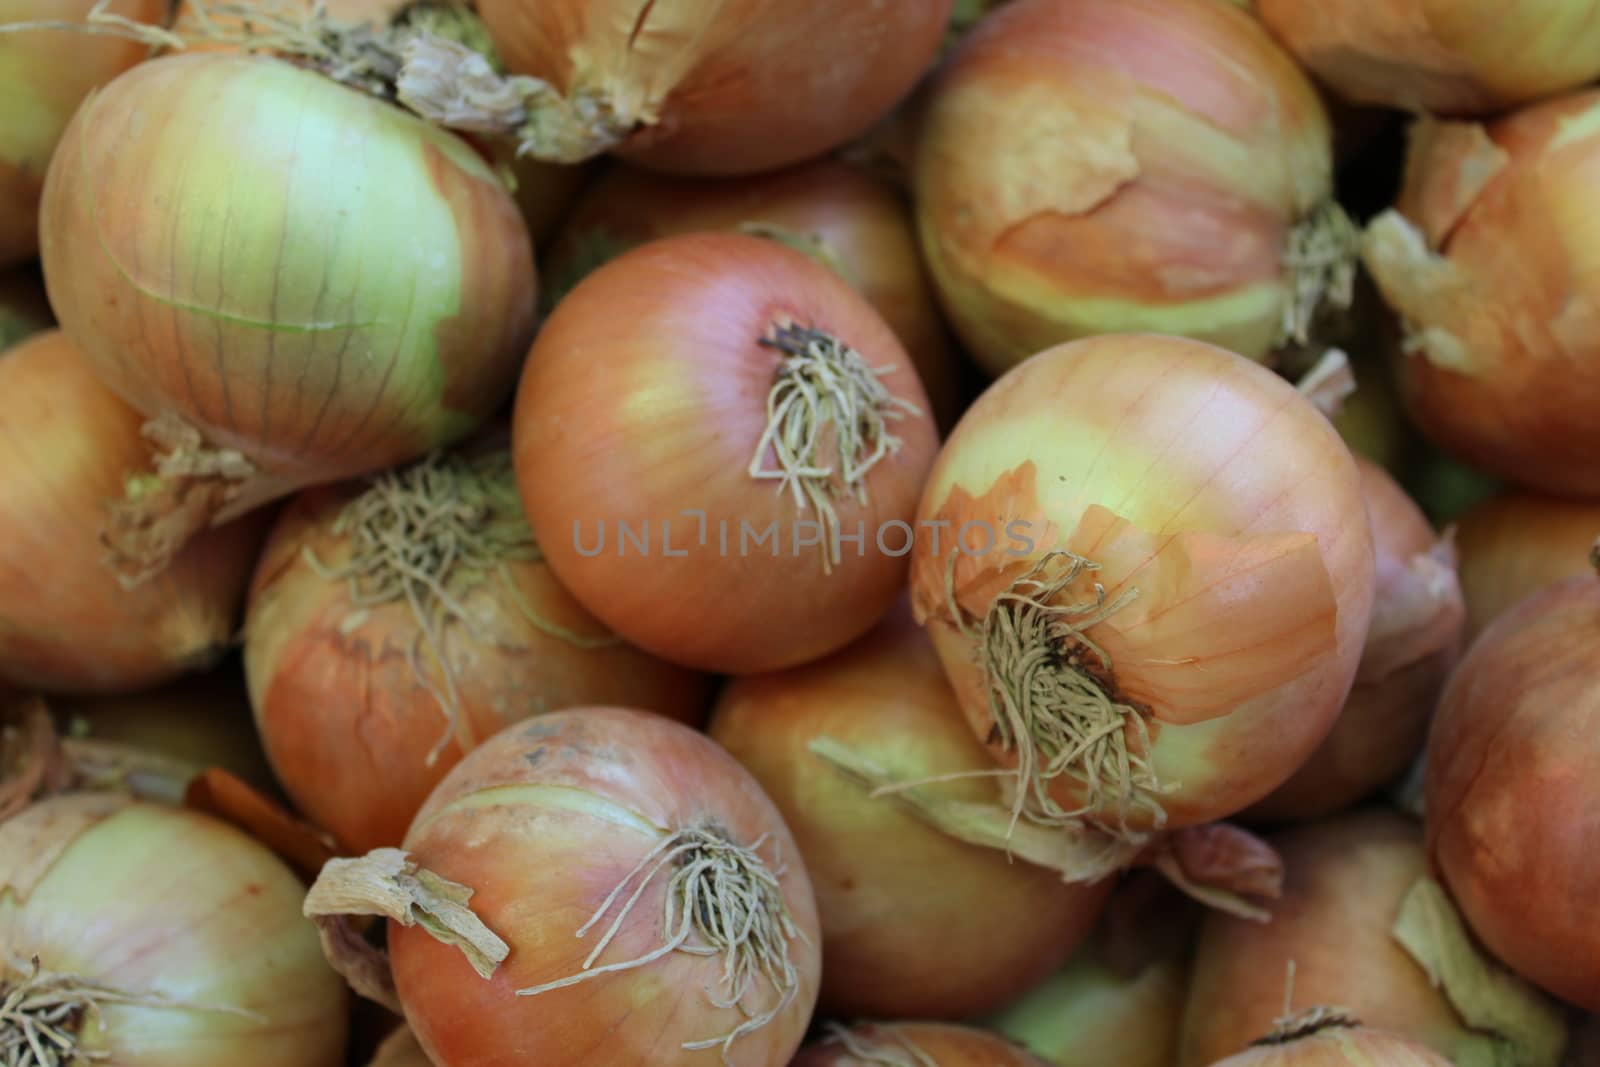 A bunch of onions on display at a market.